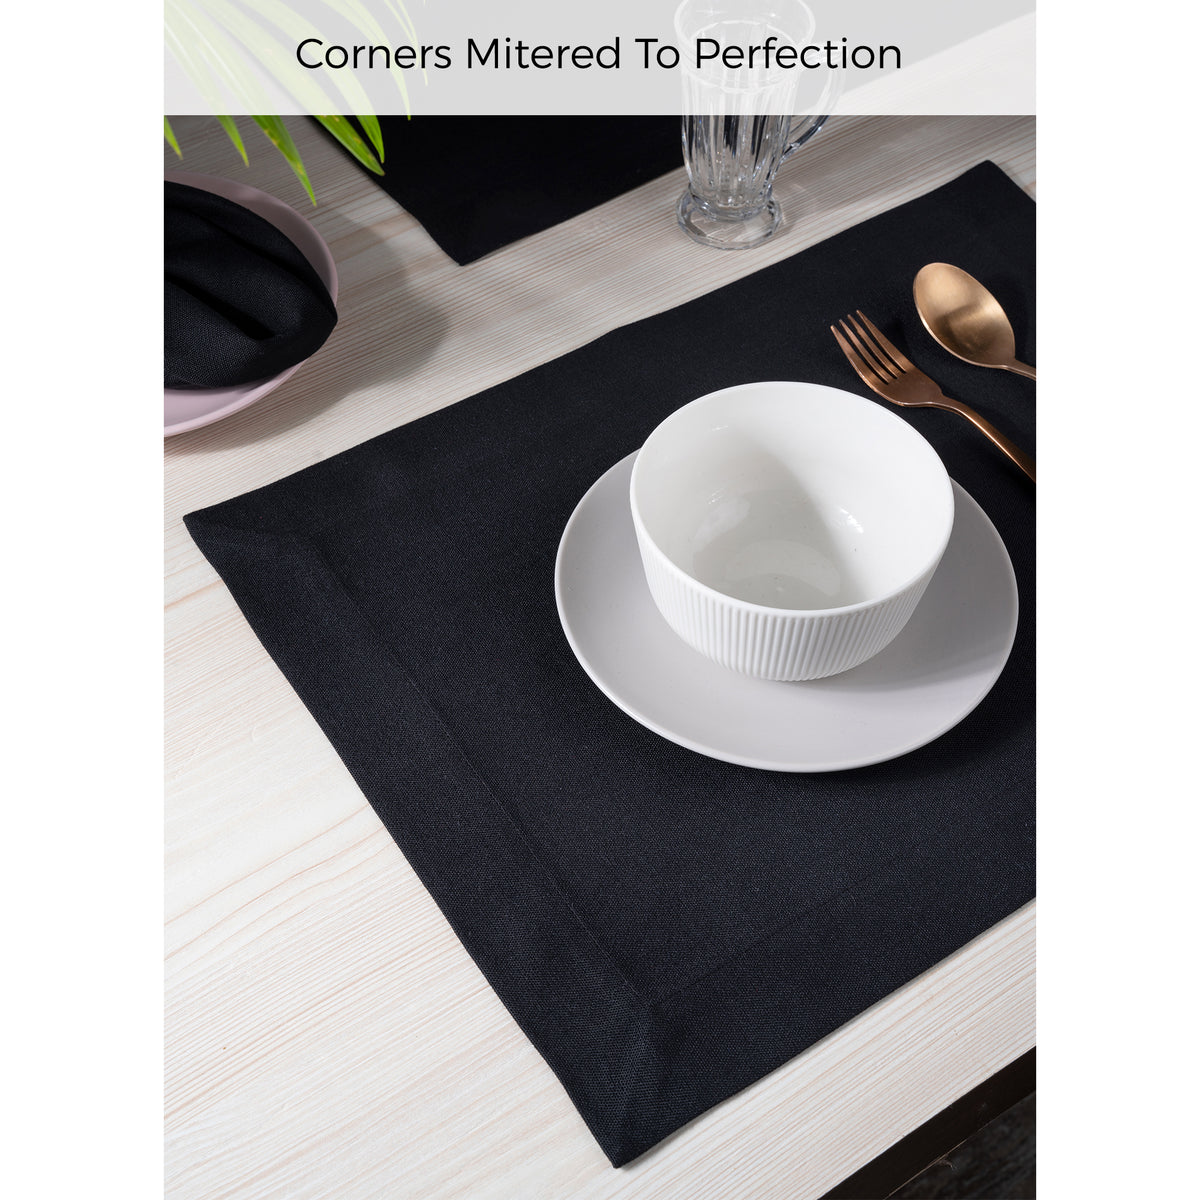 Black Faux Linen Placemats 14 x 19 Inch Set of 4 - Mitered Corner